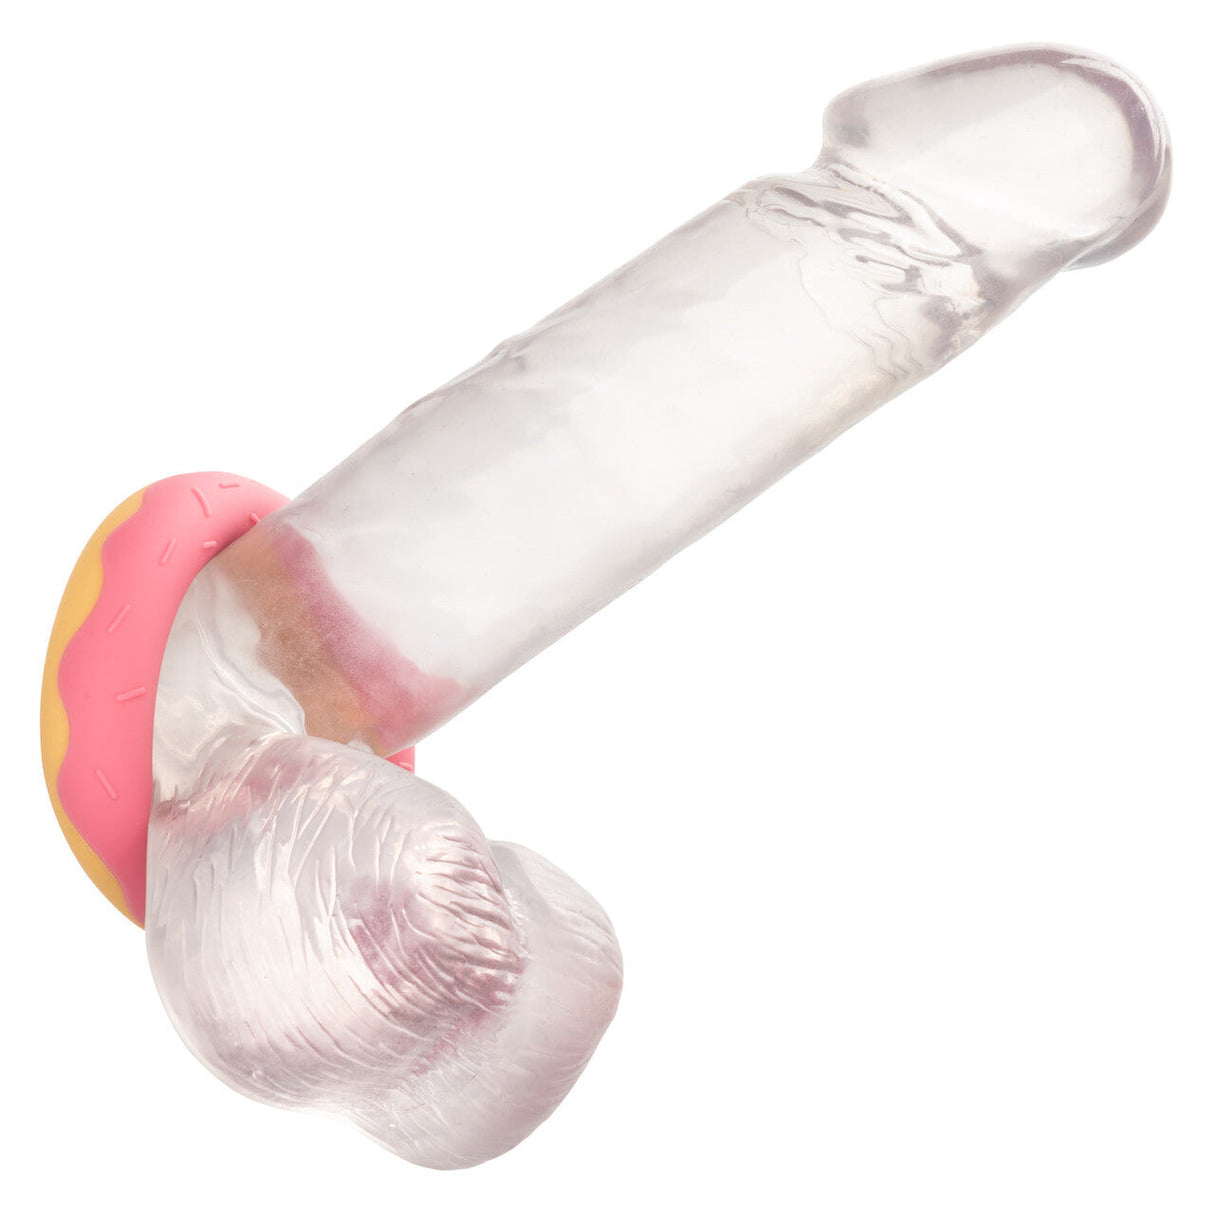 Naughty Bits Dickin' Donuts Silicone Donut Cock Ring Intimates Adult Boutique